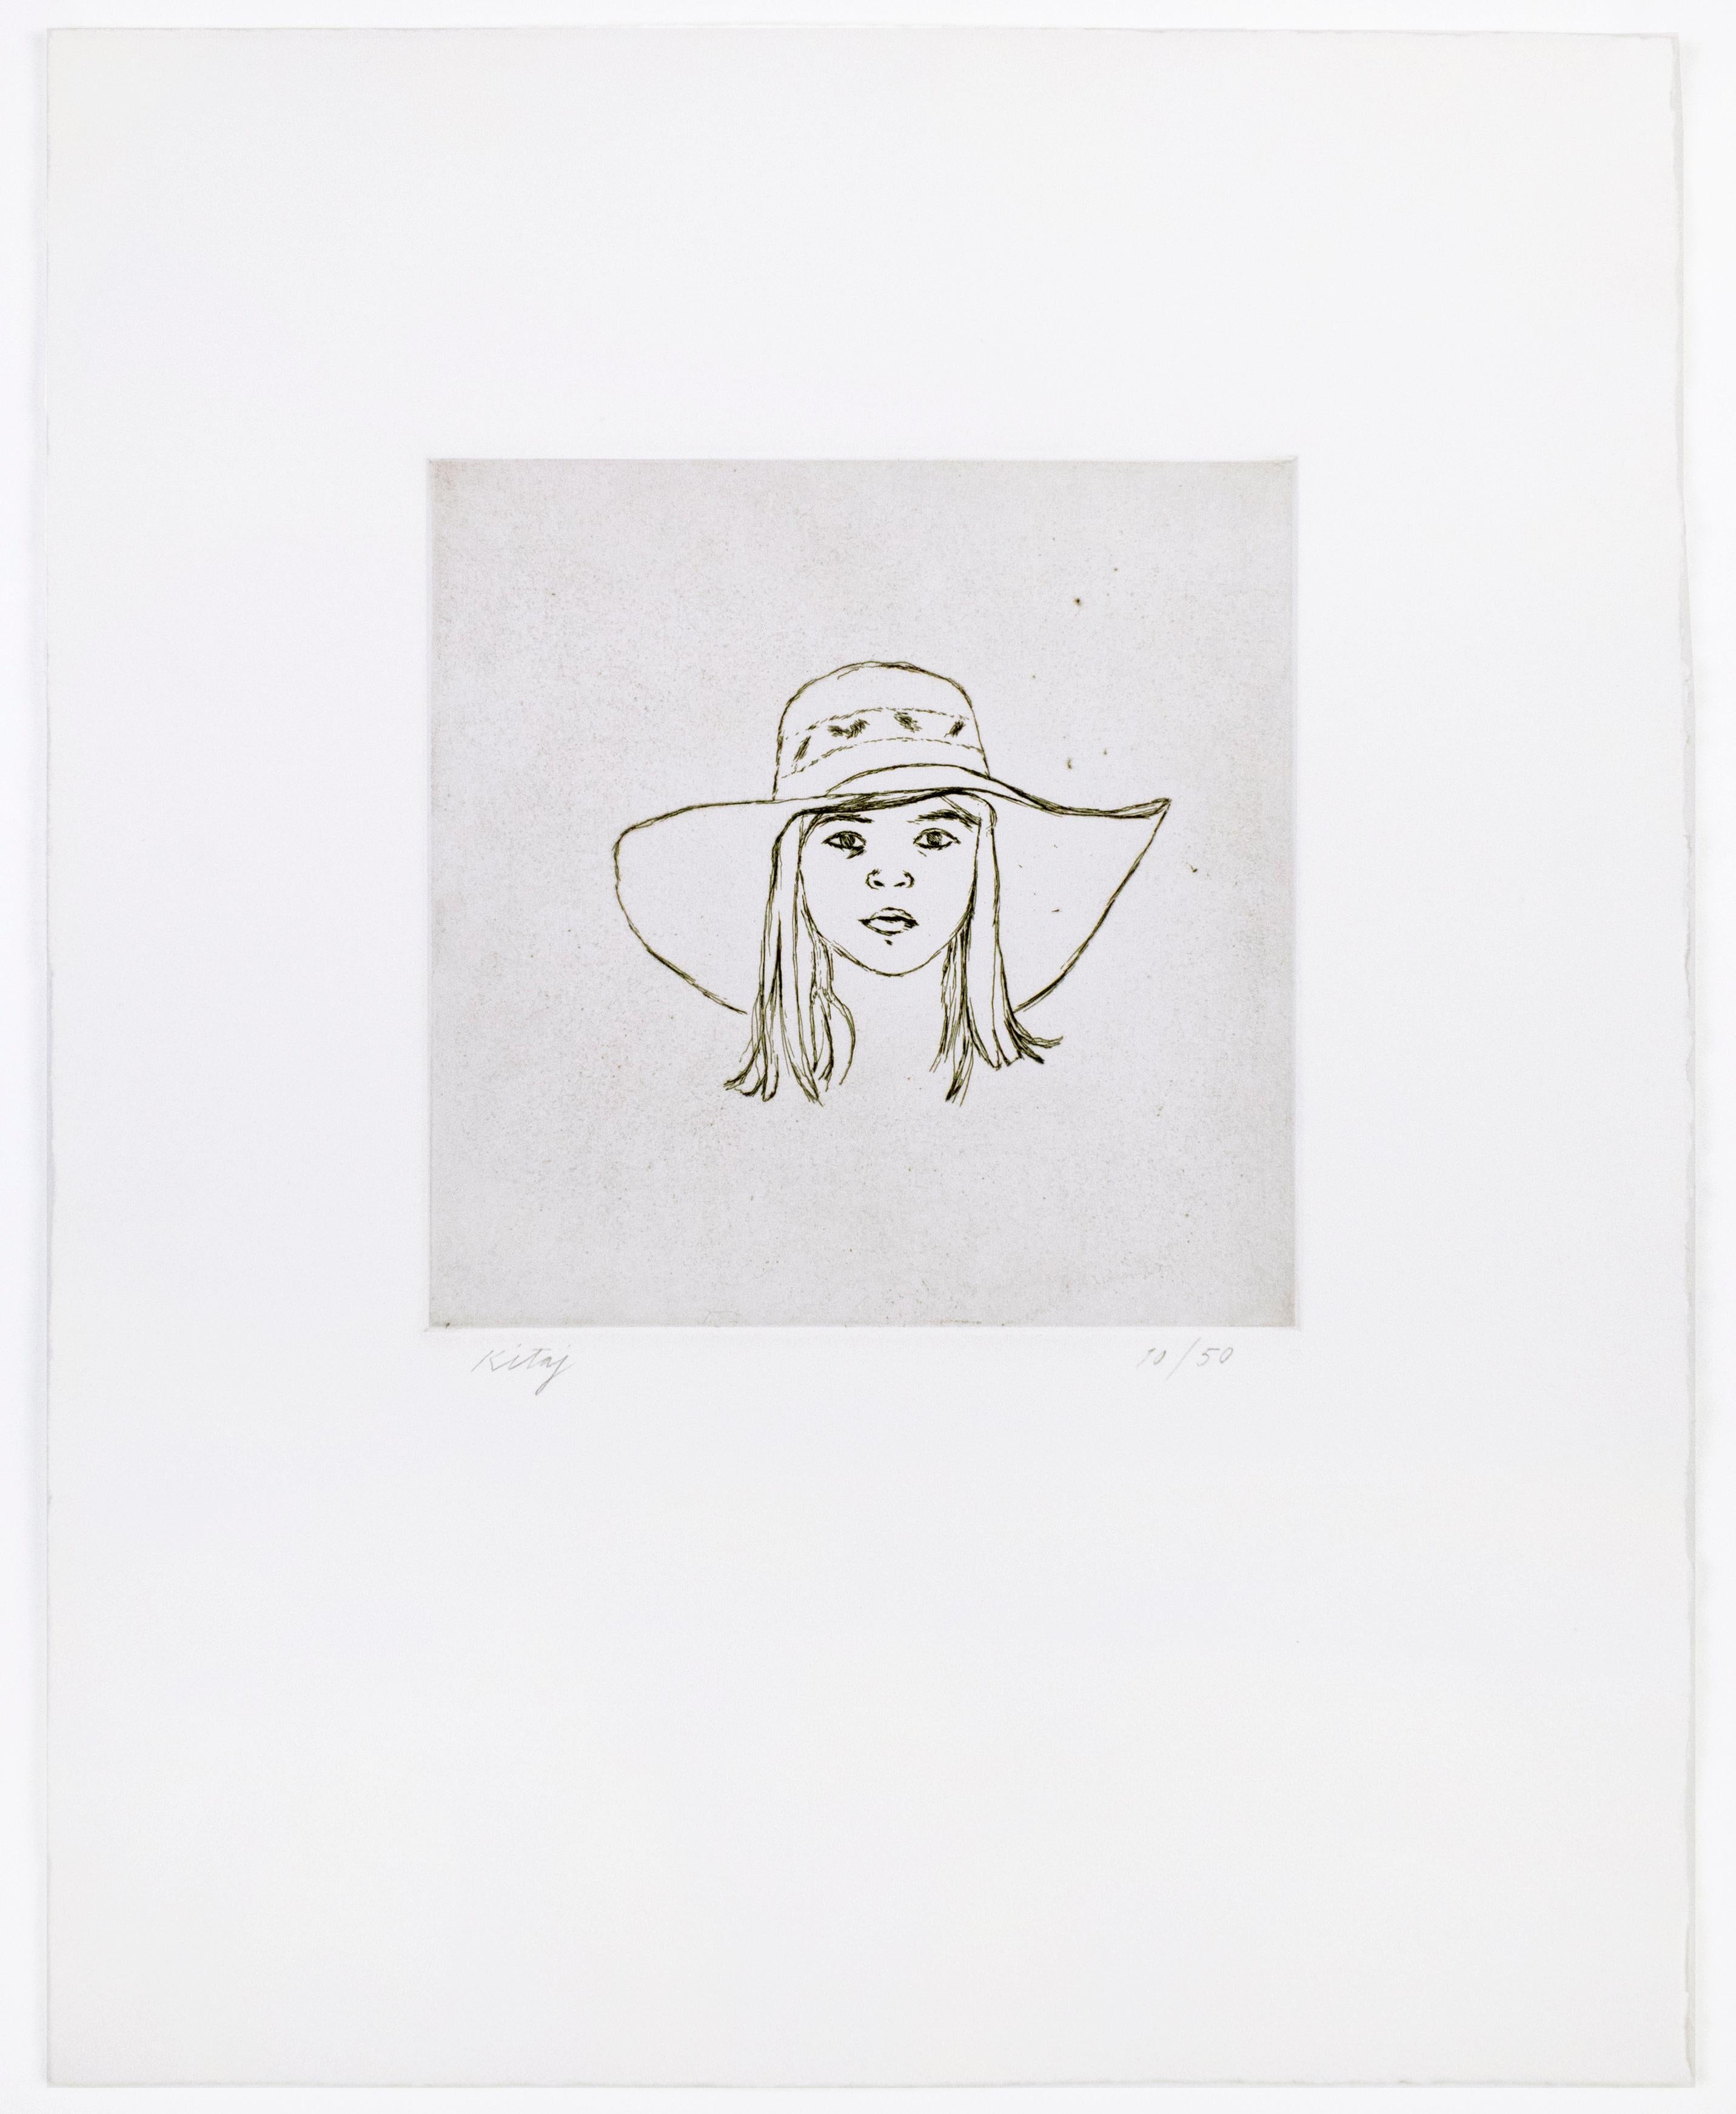 Dominie in Catalonia, Kitaj drawing black white portrait of young girl with hat - Print by Ronald Brooks Kitaj